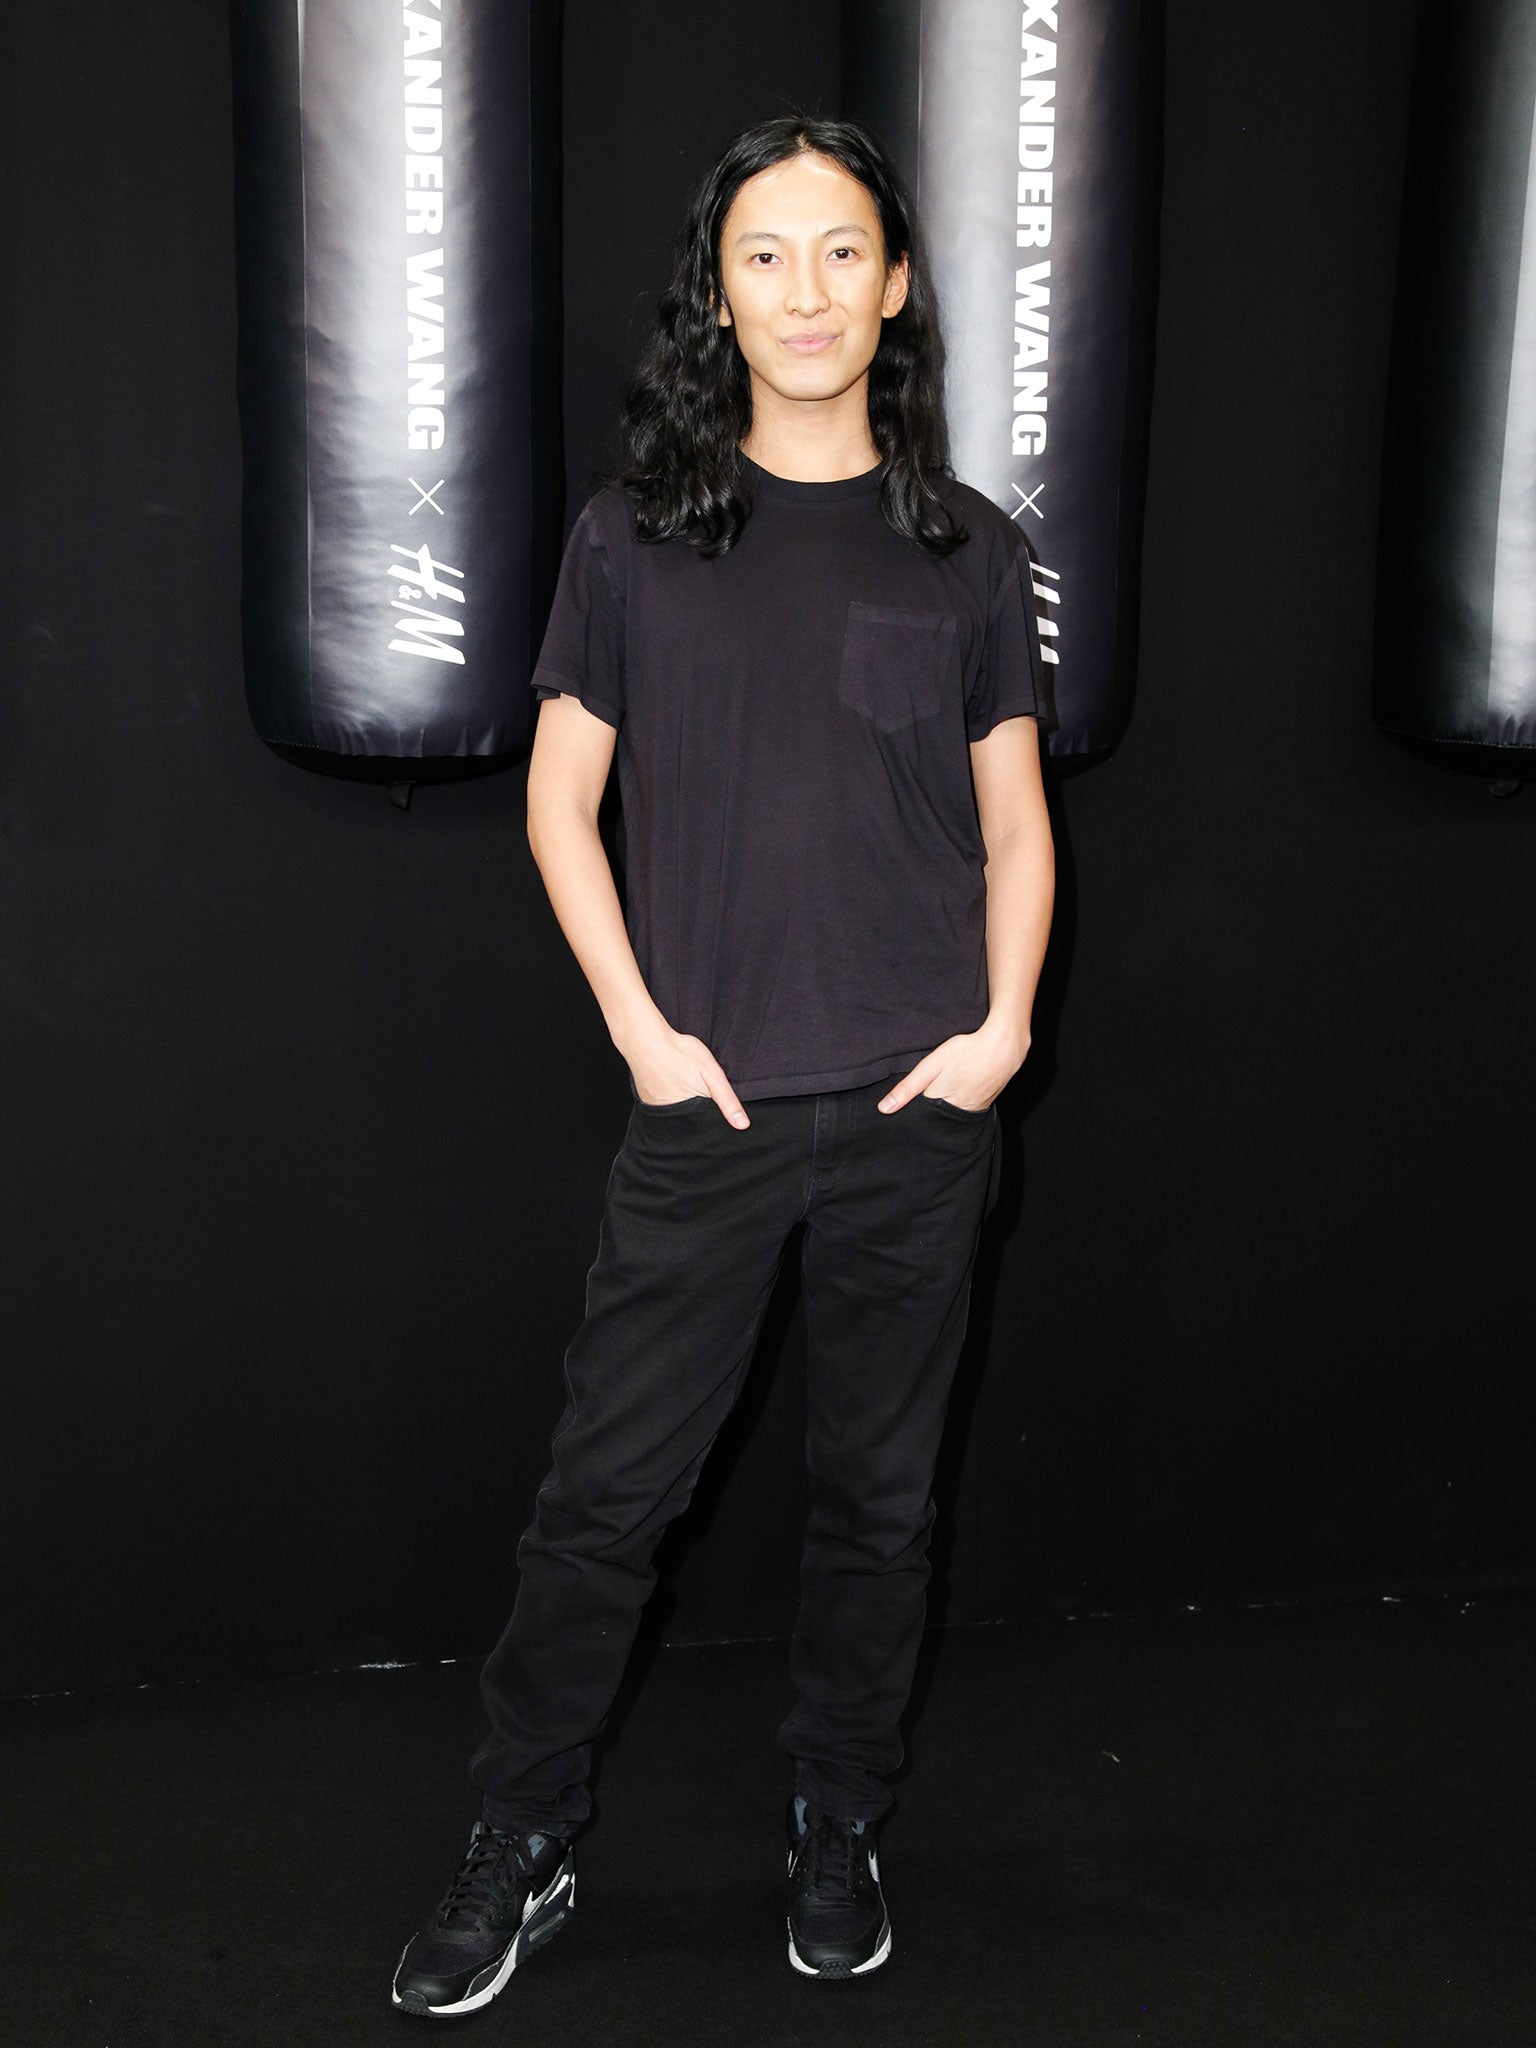 The Alexander Wang x H&M collection debuts on the runway in New York -  Fucking Young!